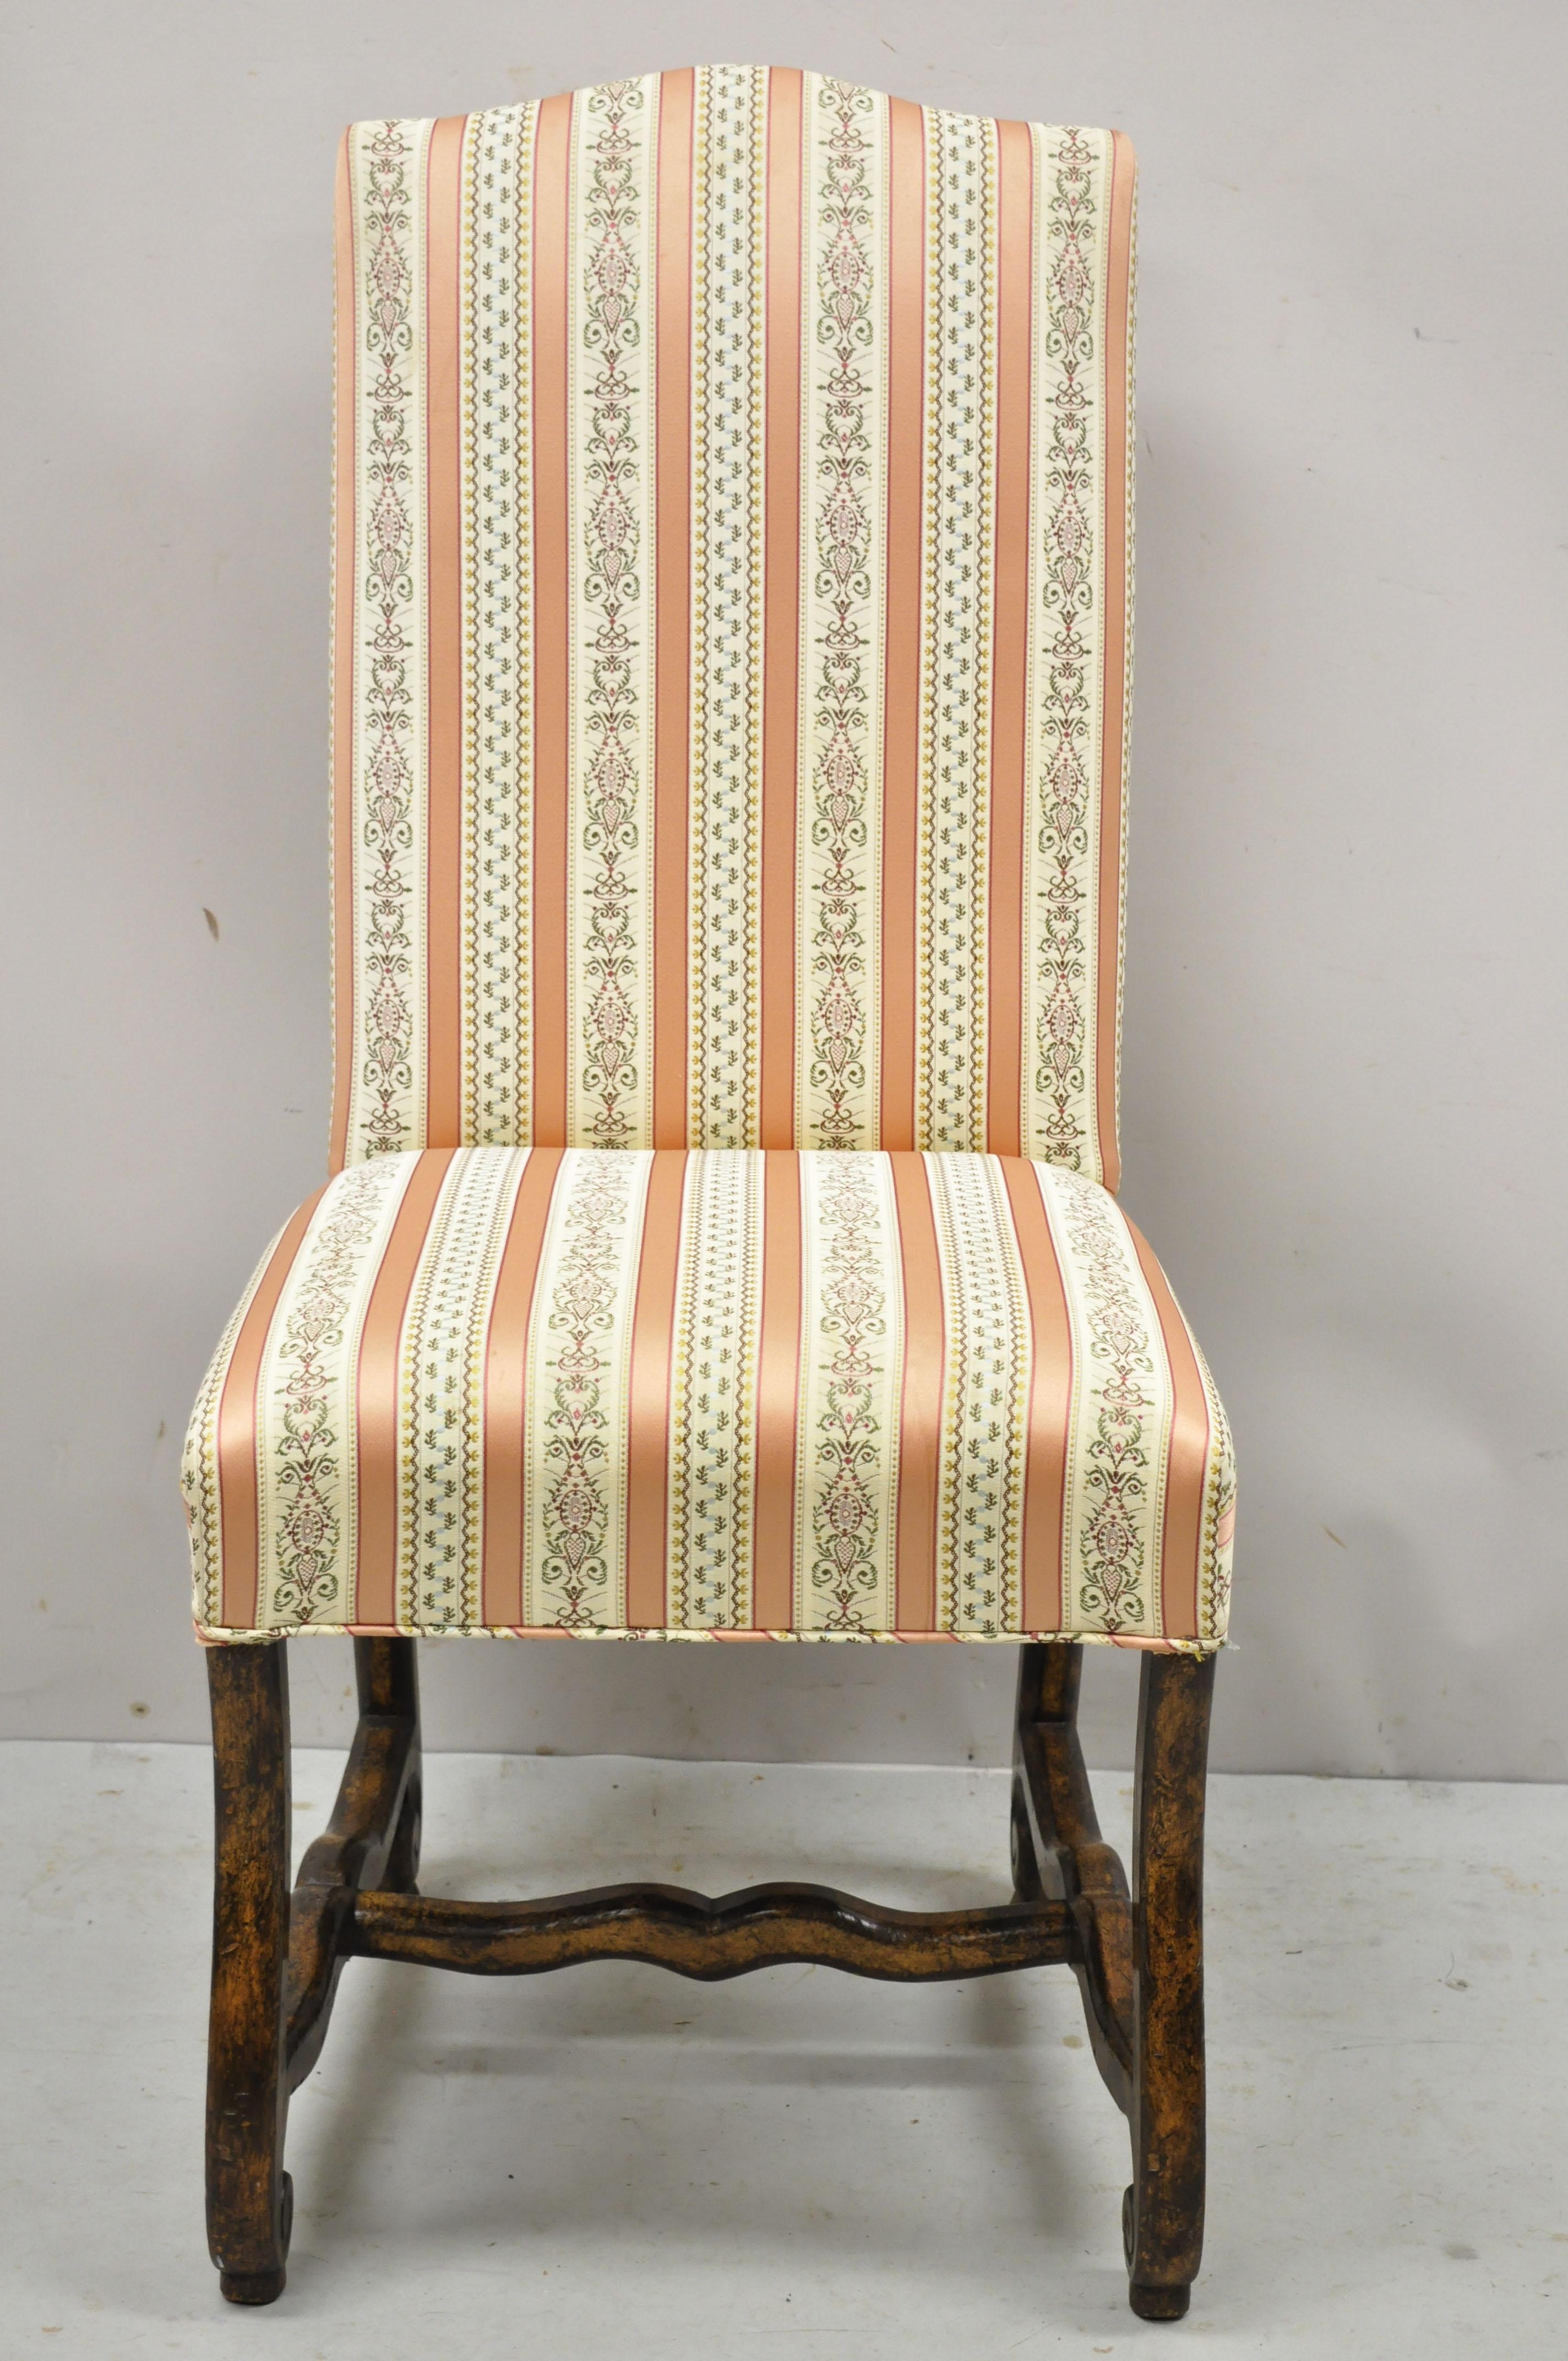 Vintage Italian Spanish Baroque style upholstered back distressed dining chairs - set of 6. Set includes (6) side chairs, pink and gold upholstery, solid wood construction, distressed finish, very nice vintage set, great style and form. Circa late